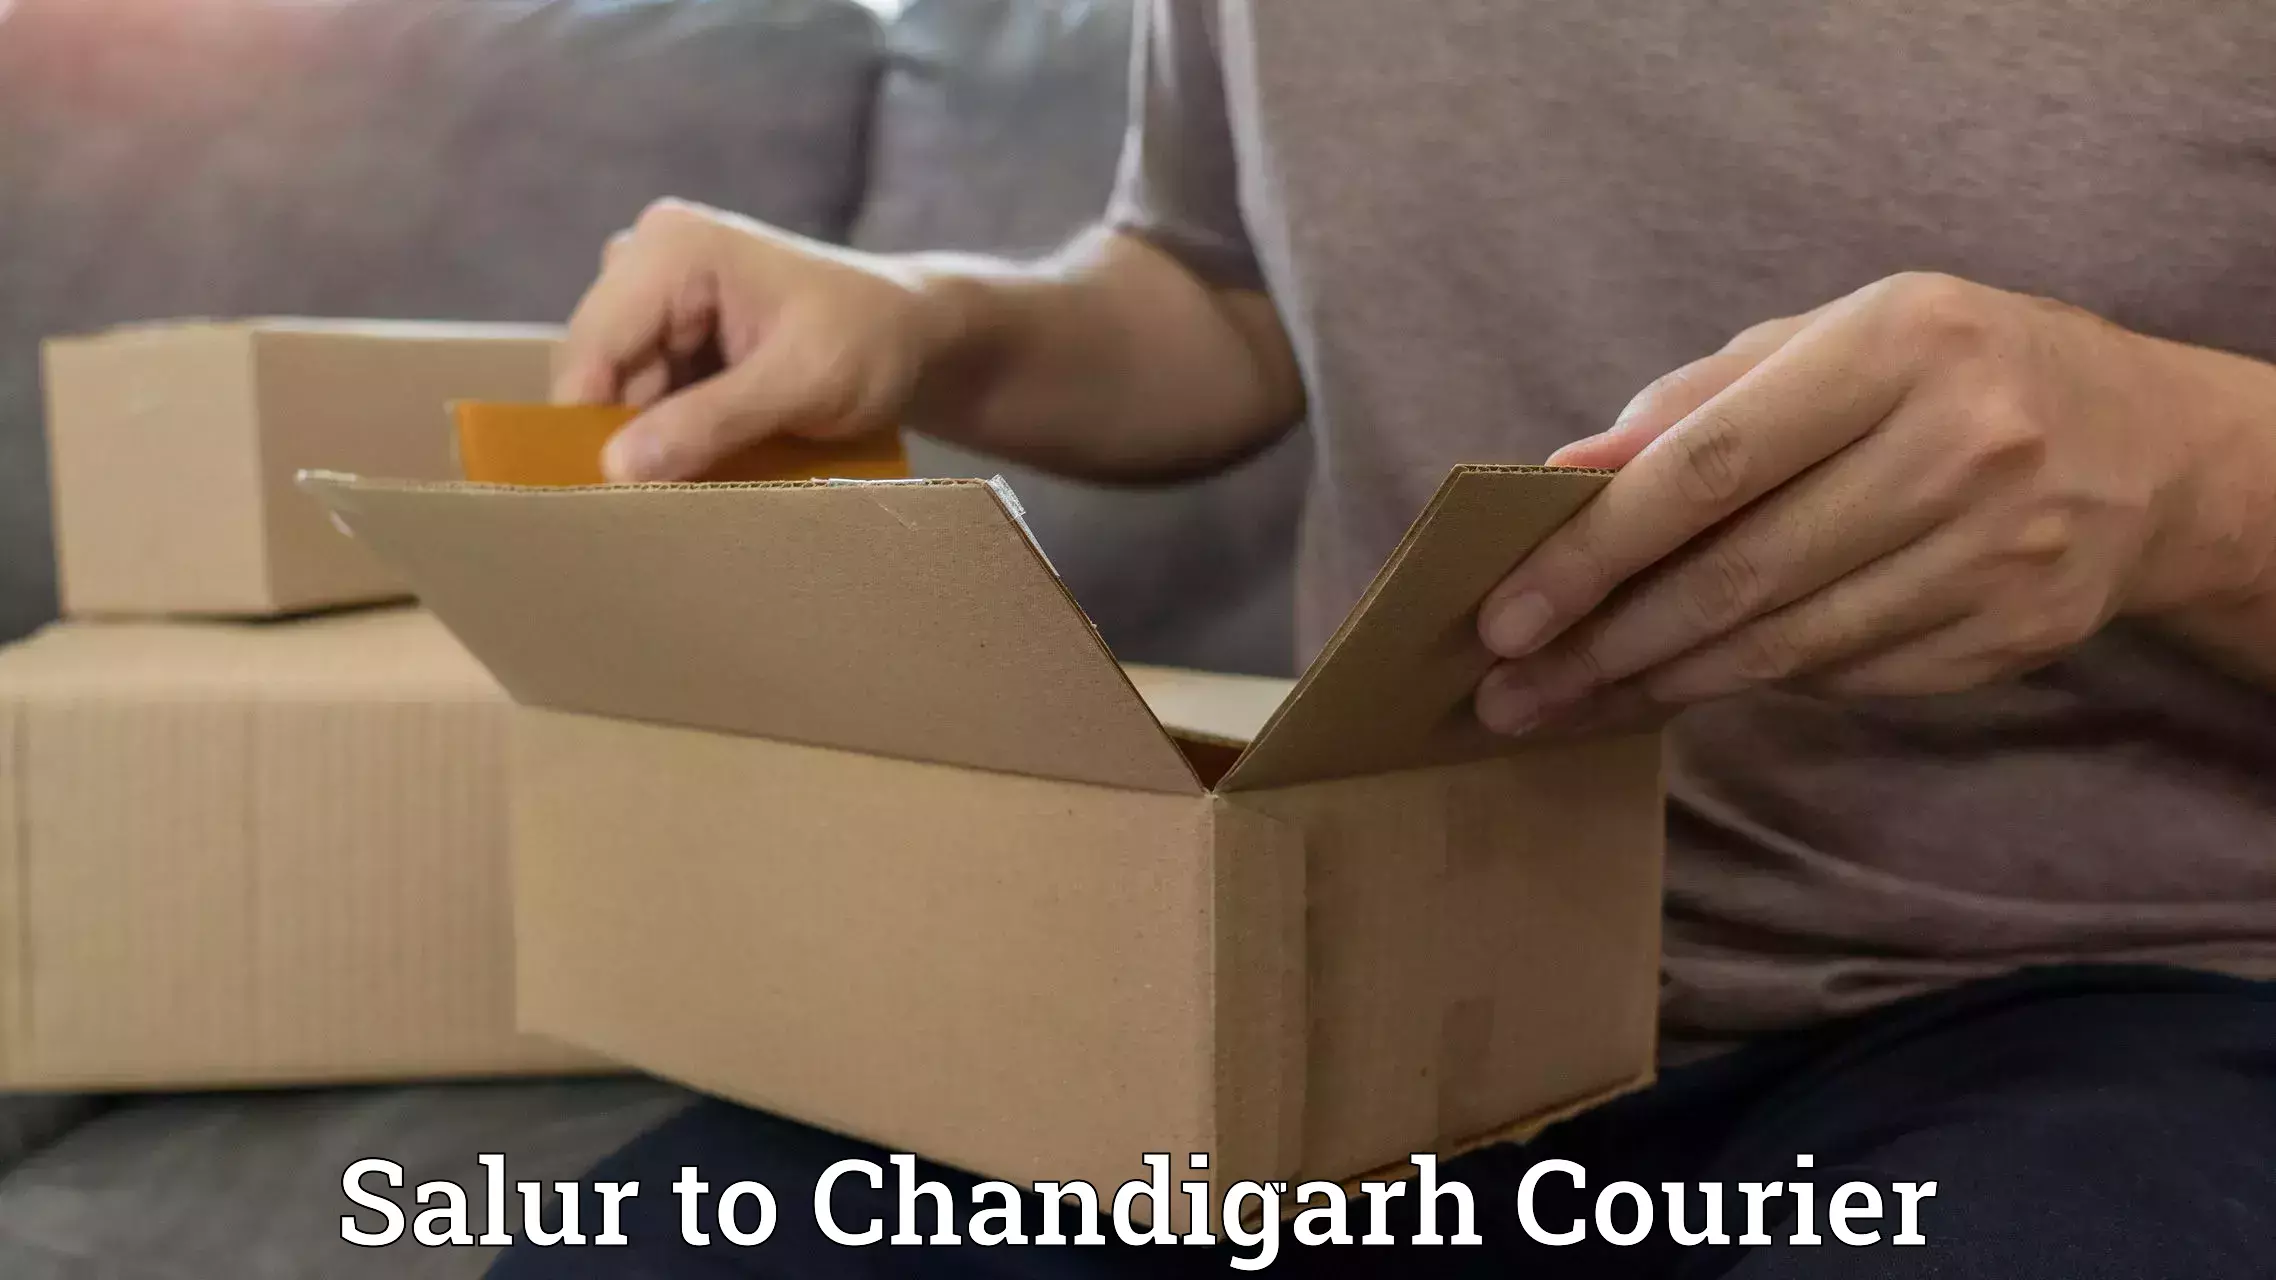 Courier service innovation Salur to Chandigarh